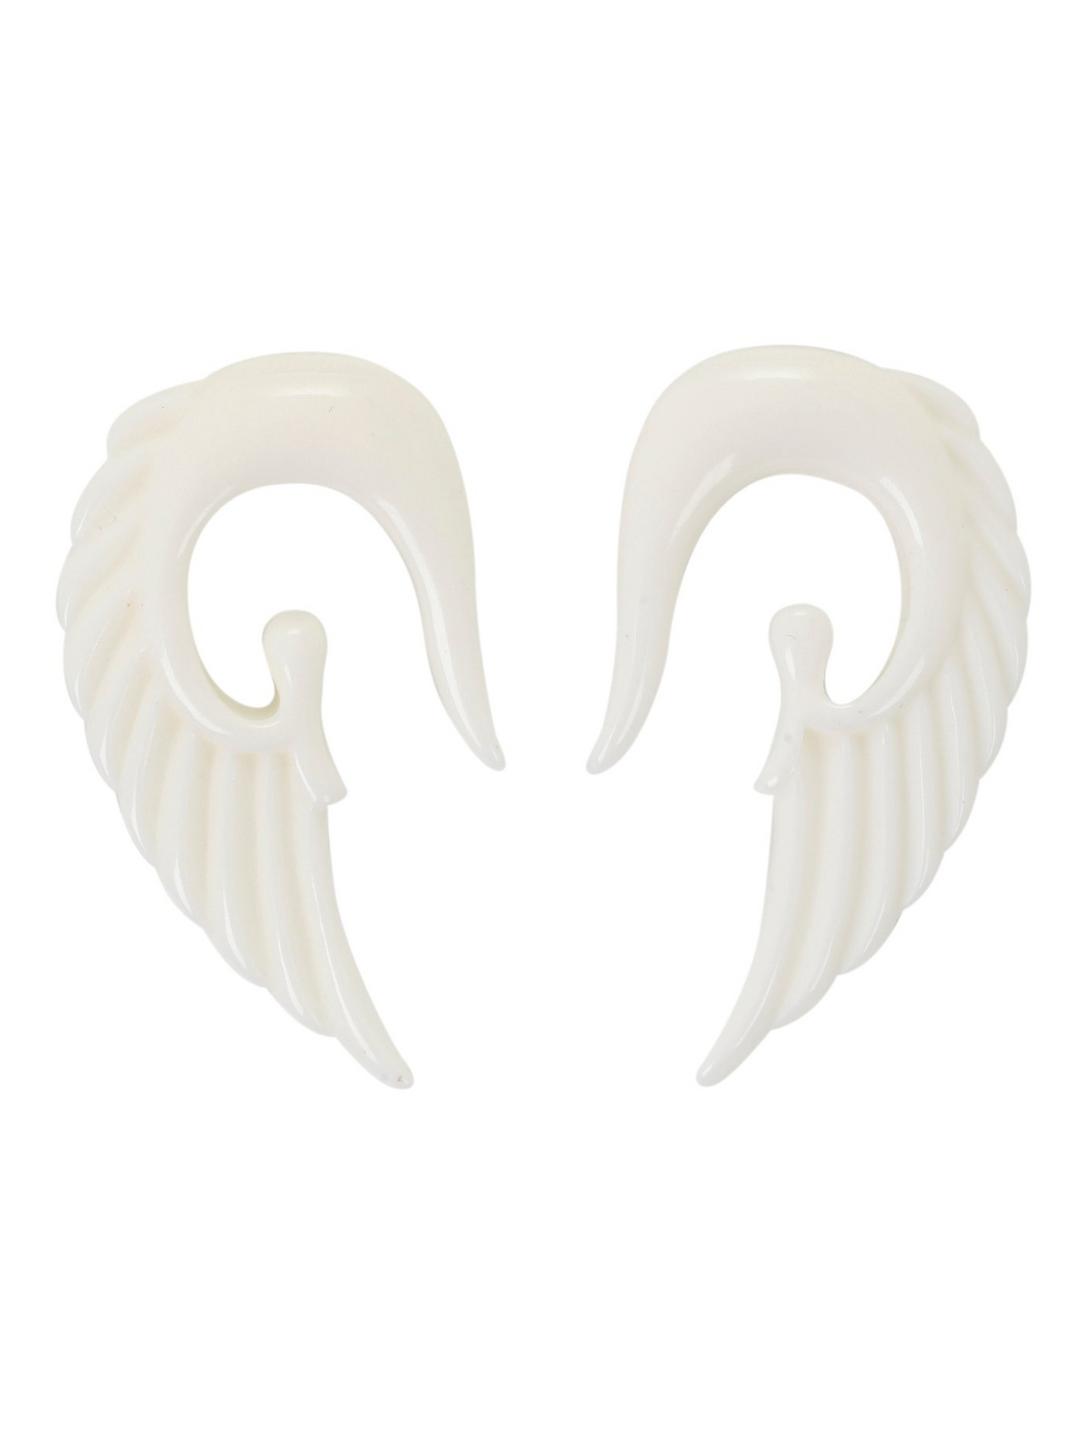 Acrylic White Wing Pincher 2 Pack, , hi-res